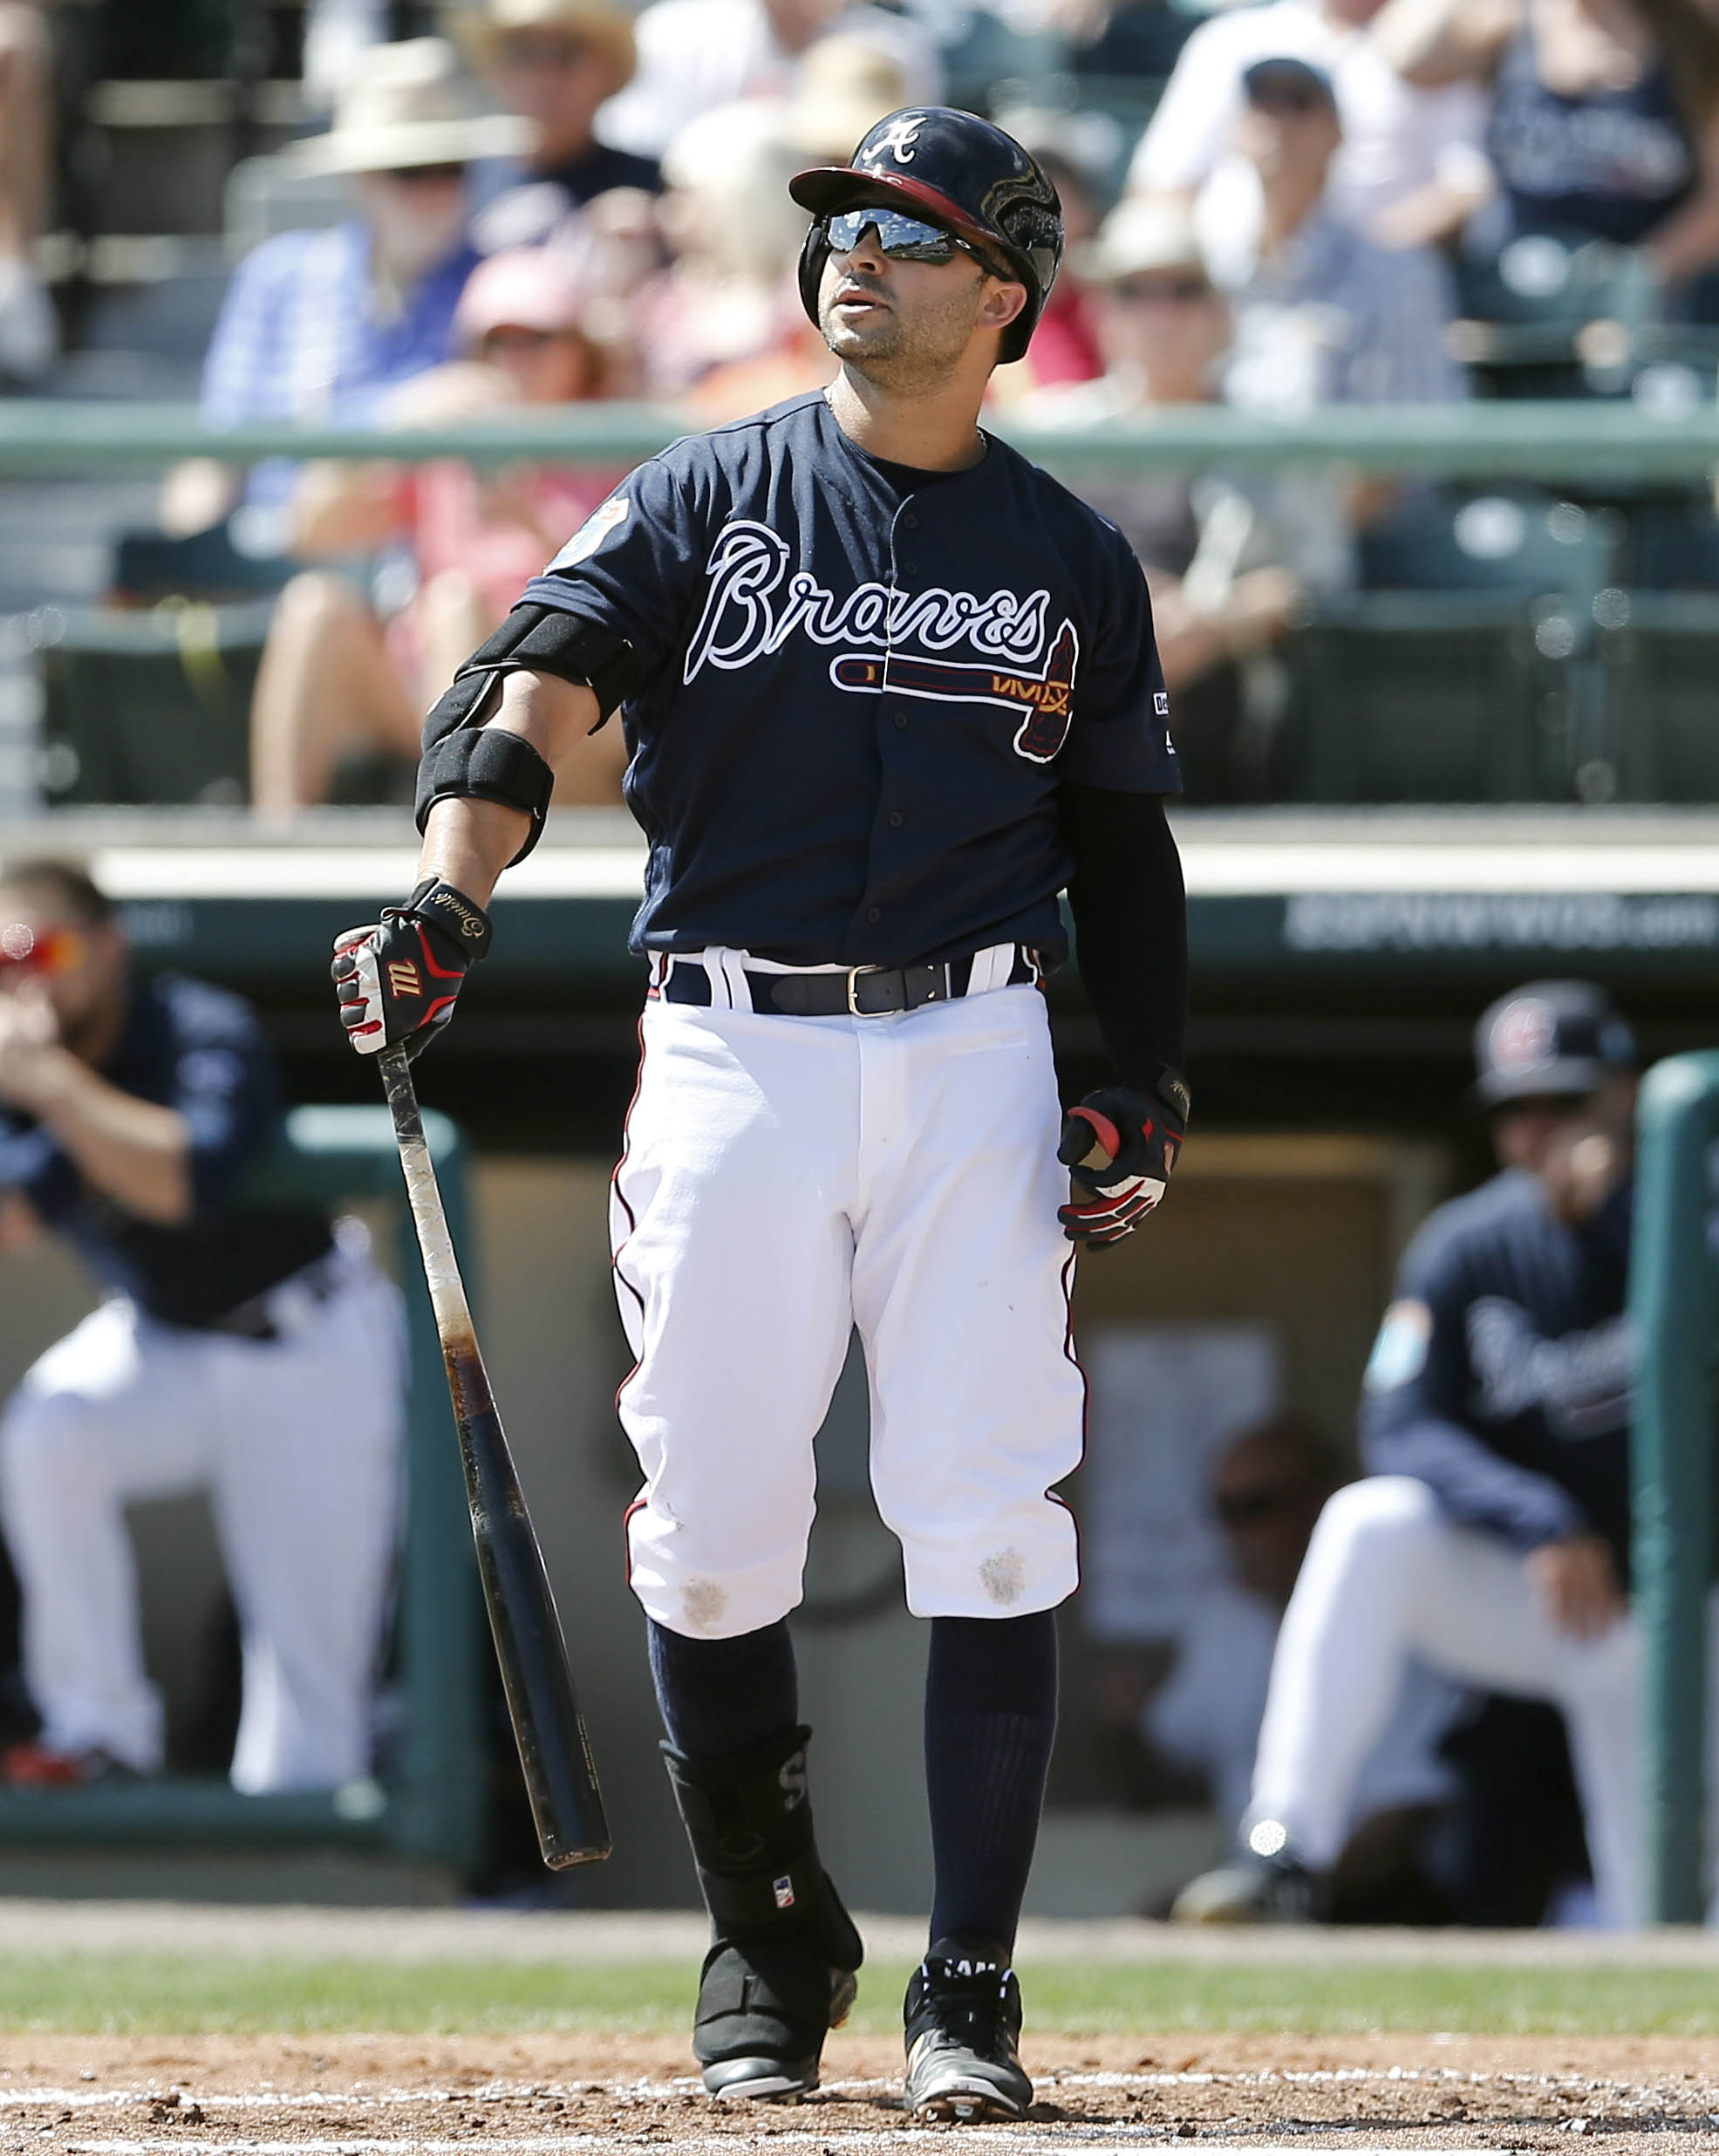 Nick Swisher leaves New York Yankees for $56 million deal with